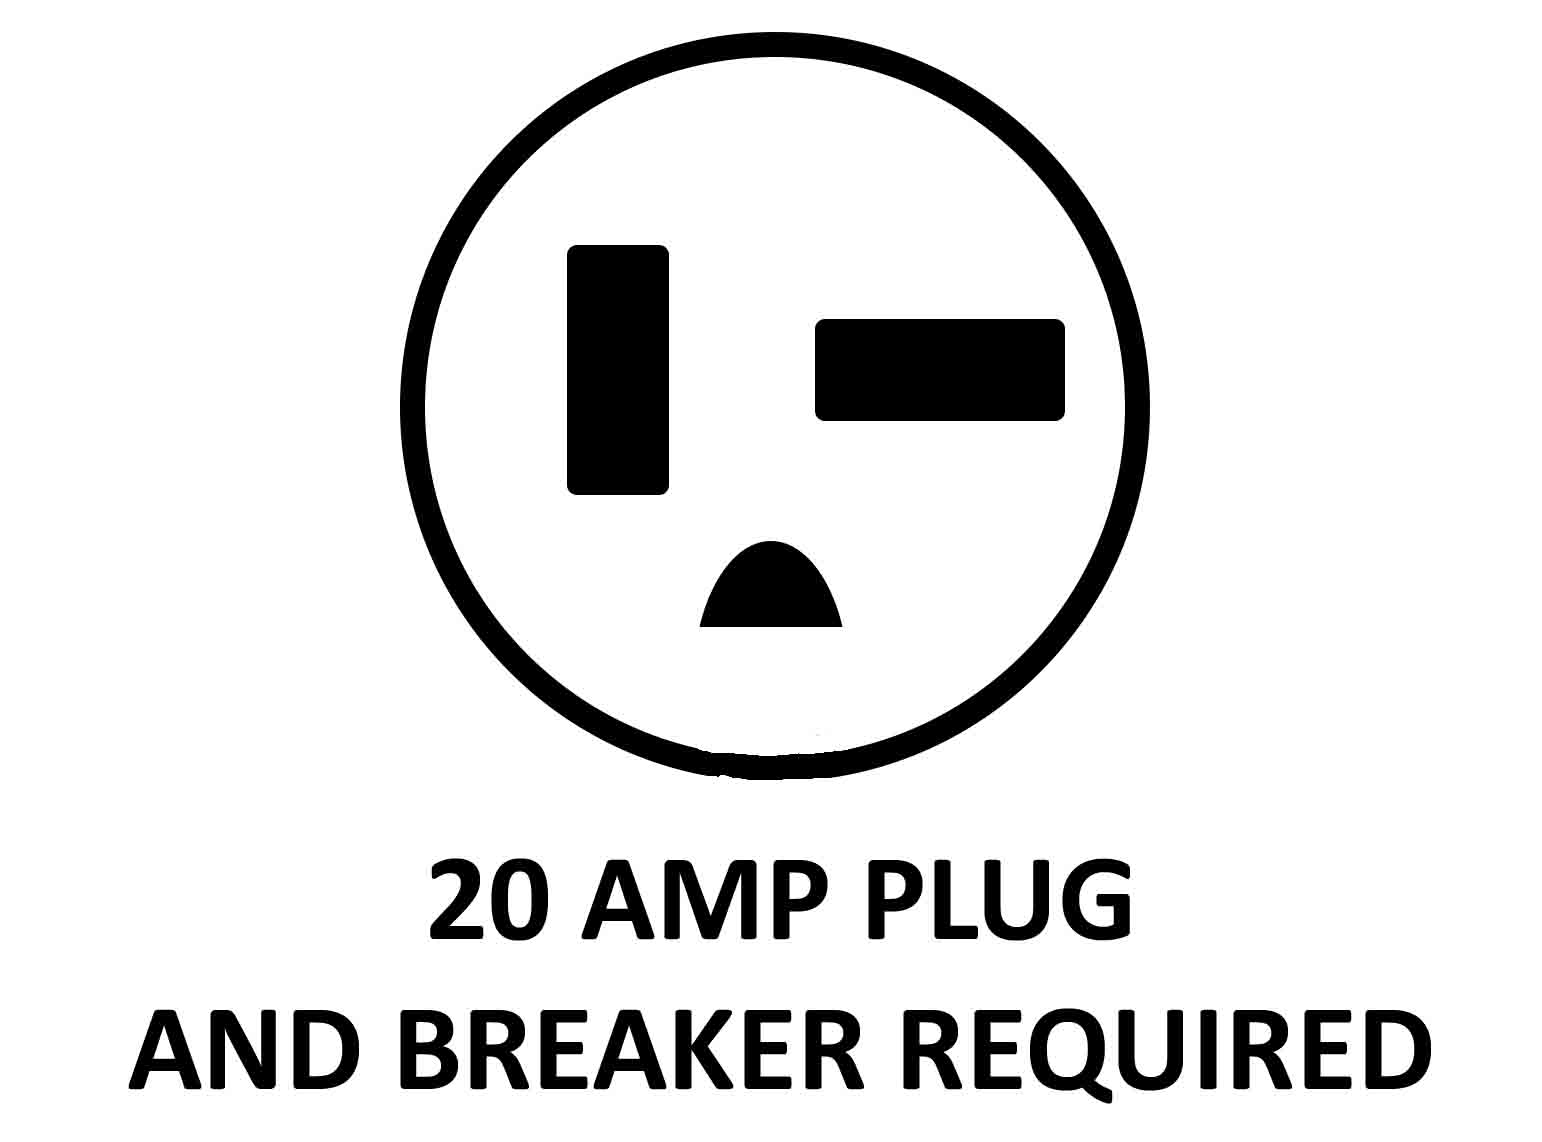 20 Amp Plug and Breaker Required